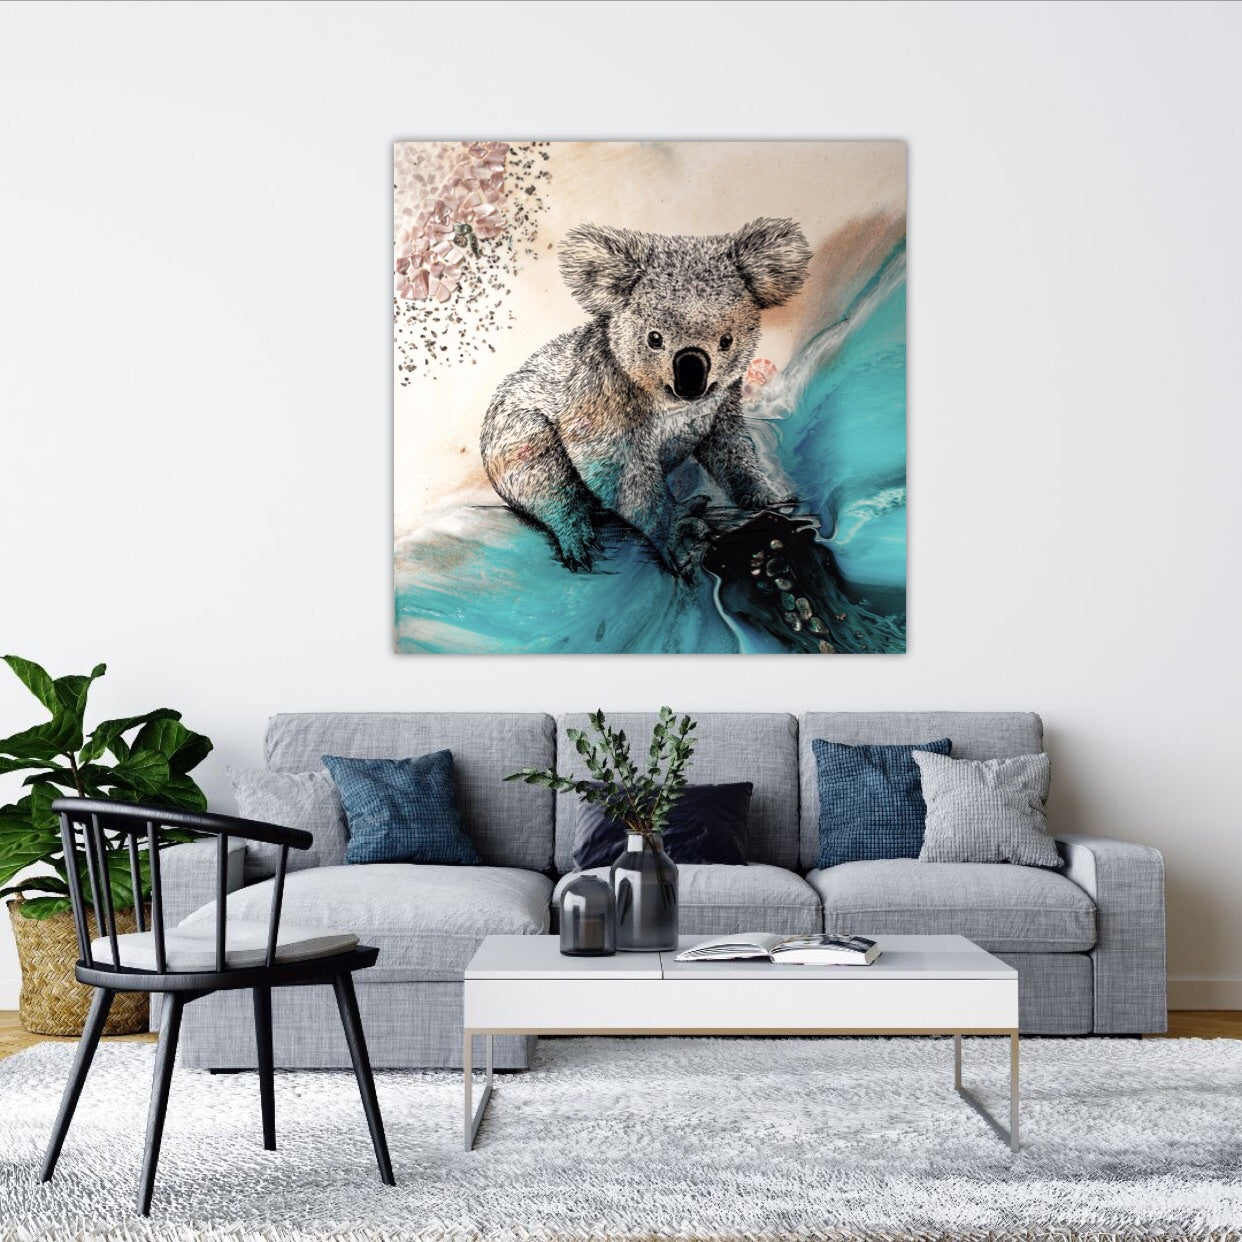 Abstract Ocean. Blue beach with Koala. Art Print. Antuanelle 4 Print for WWF Koala Conservation. Limited Edition